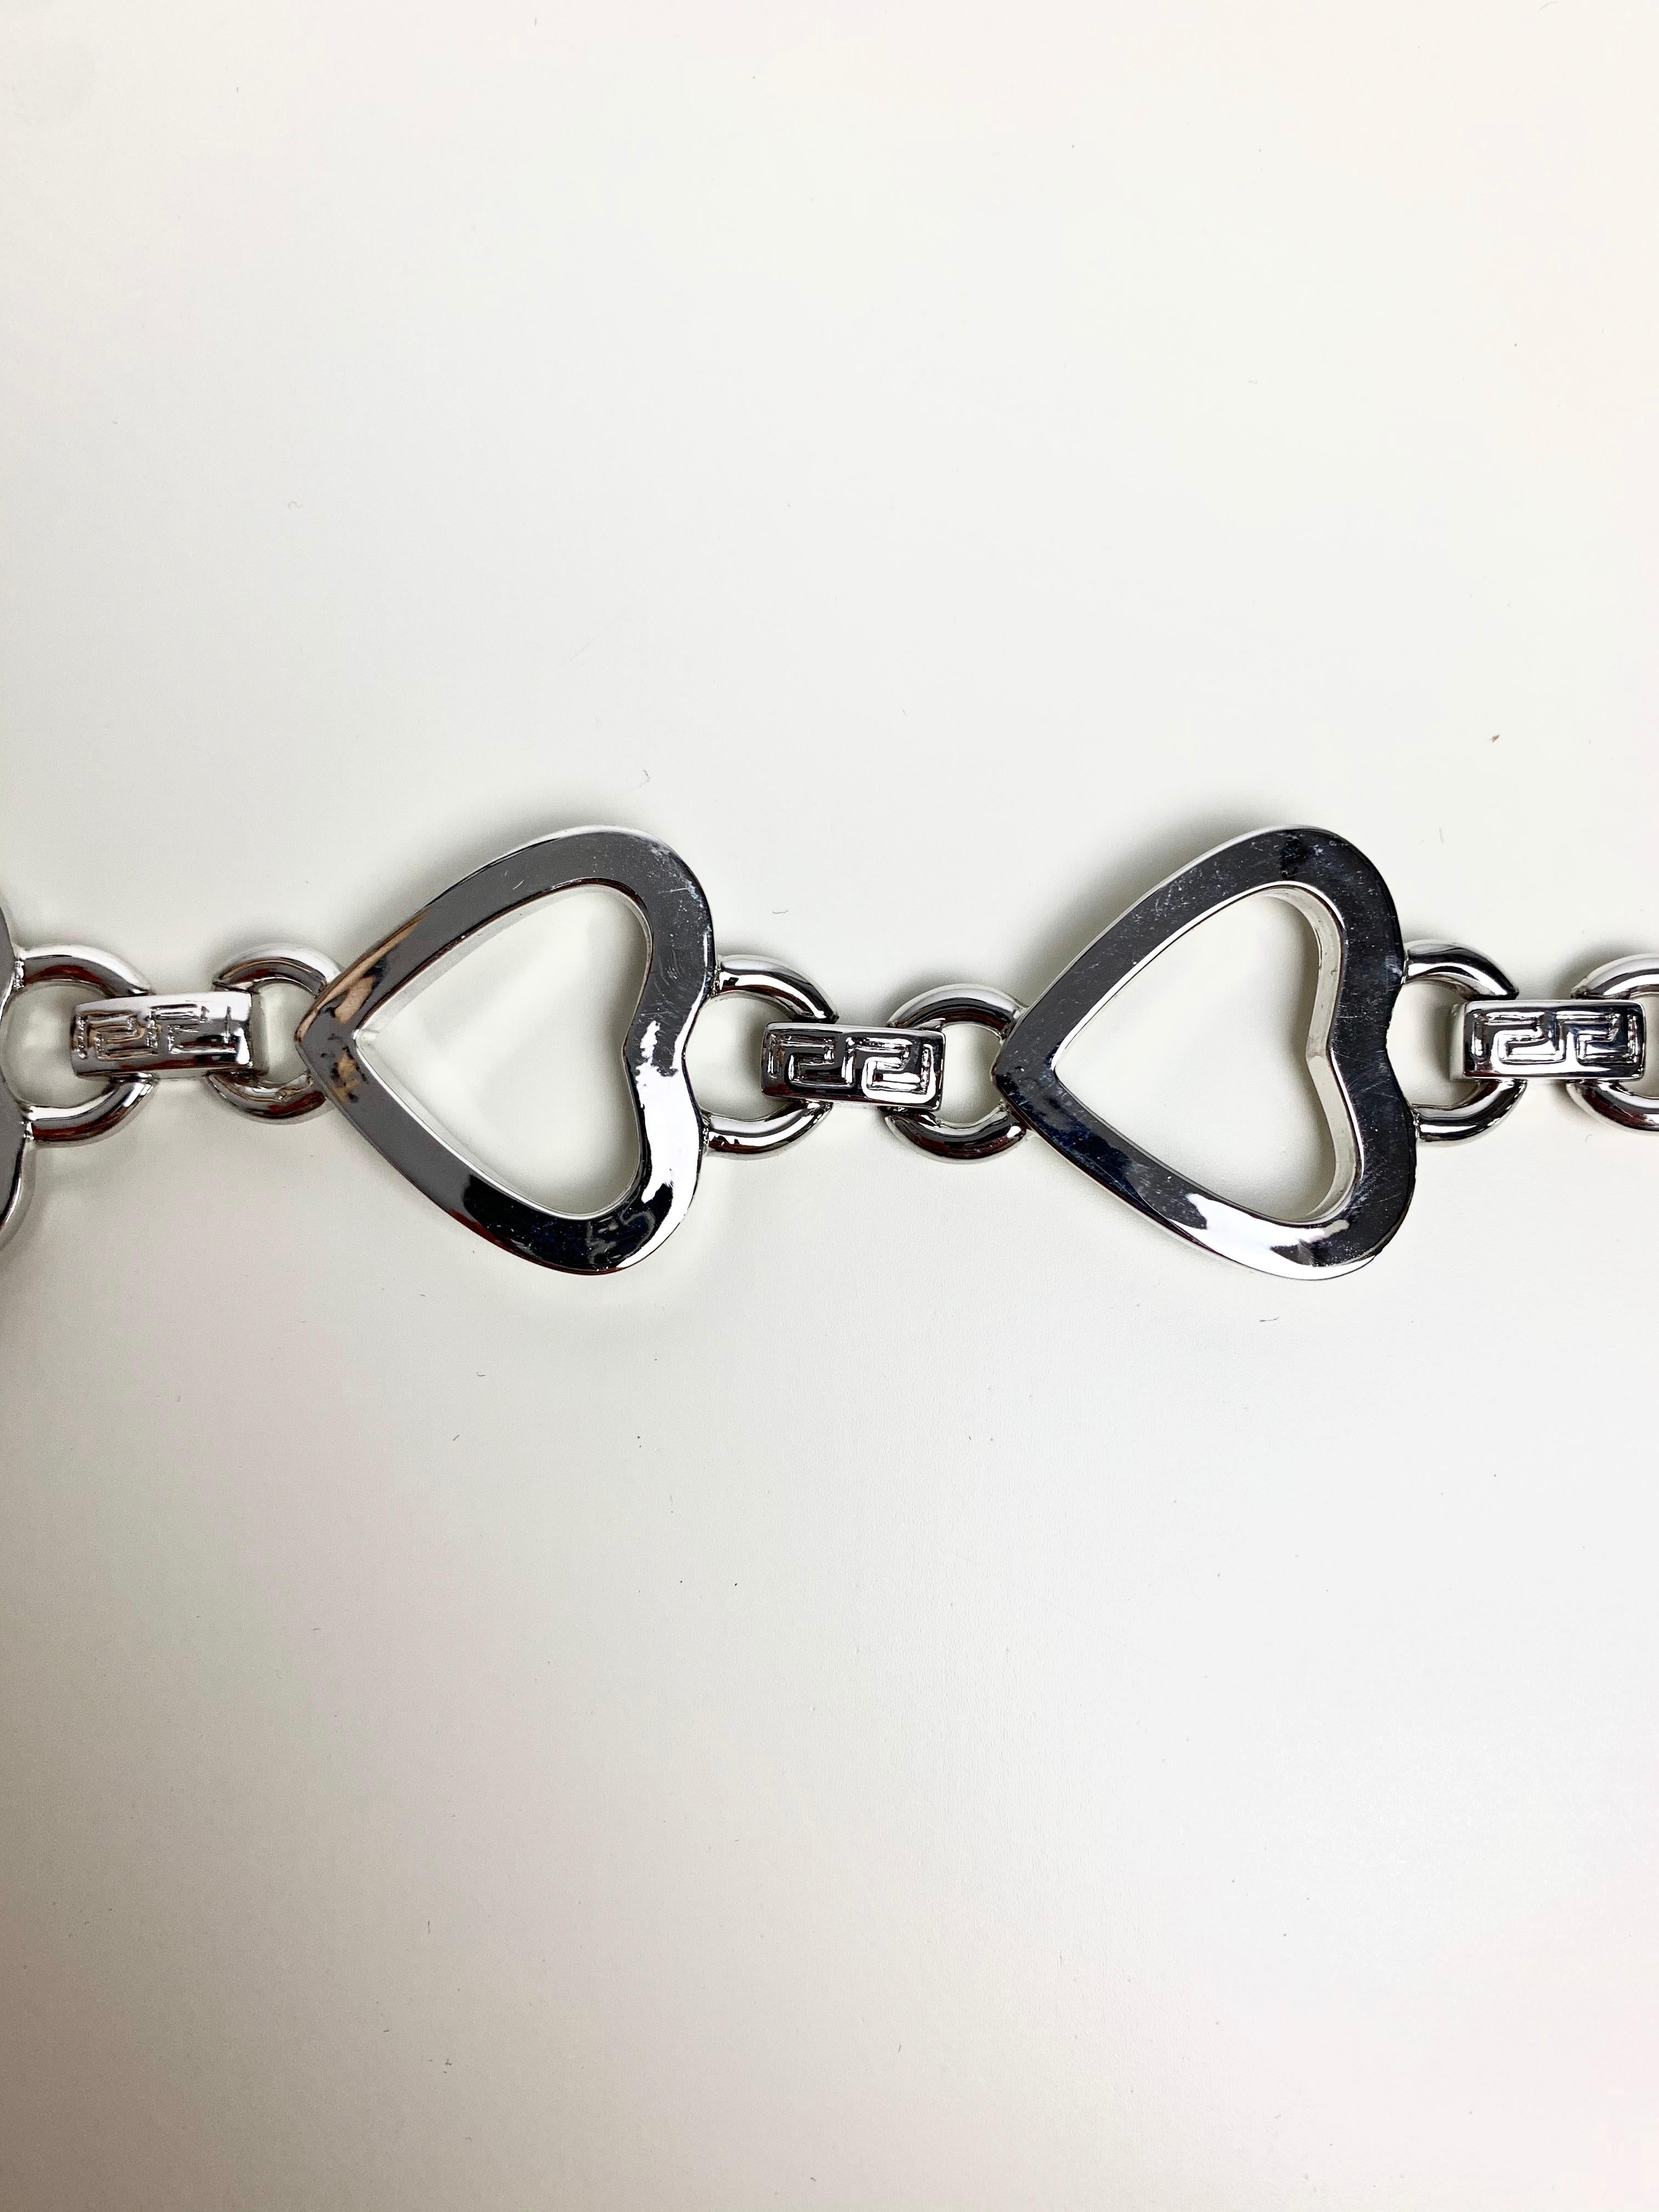 This Gianni Versace silver tone cuff love heart bracelet features a link bracelet made up of four Large love heart motifs. The curb chain features the iconic Greek tile motif and the first live hear has the Versace medusa head in the centre